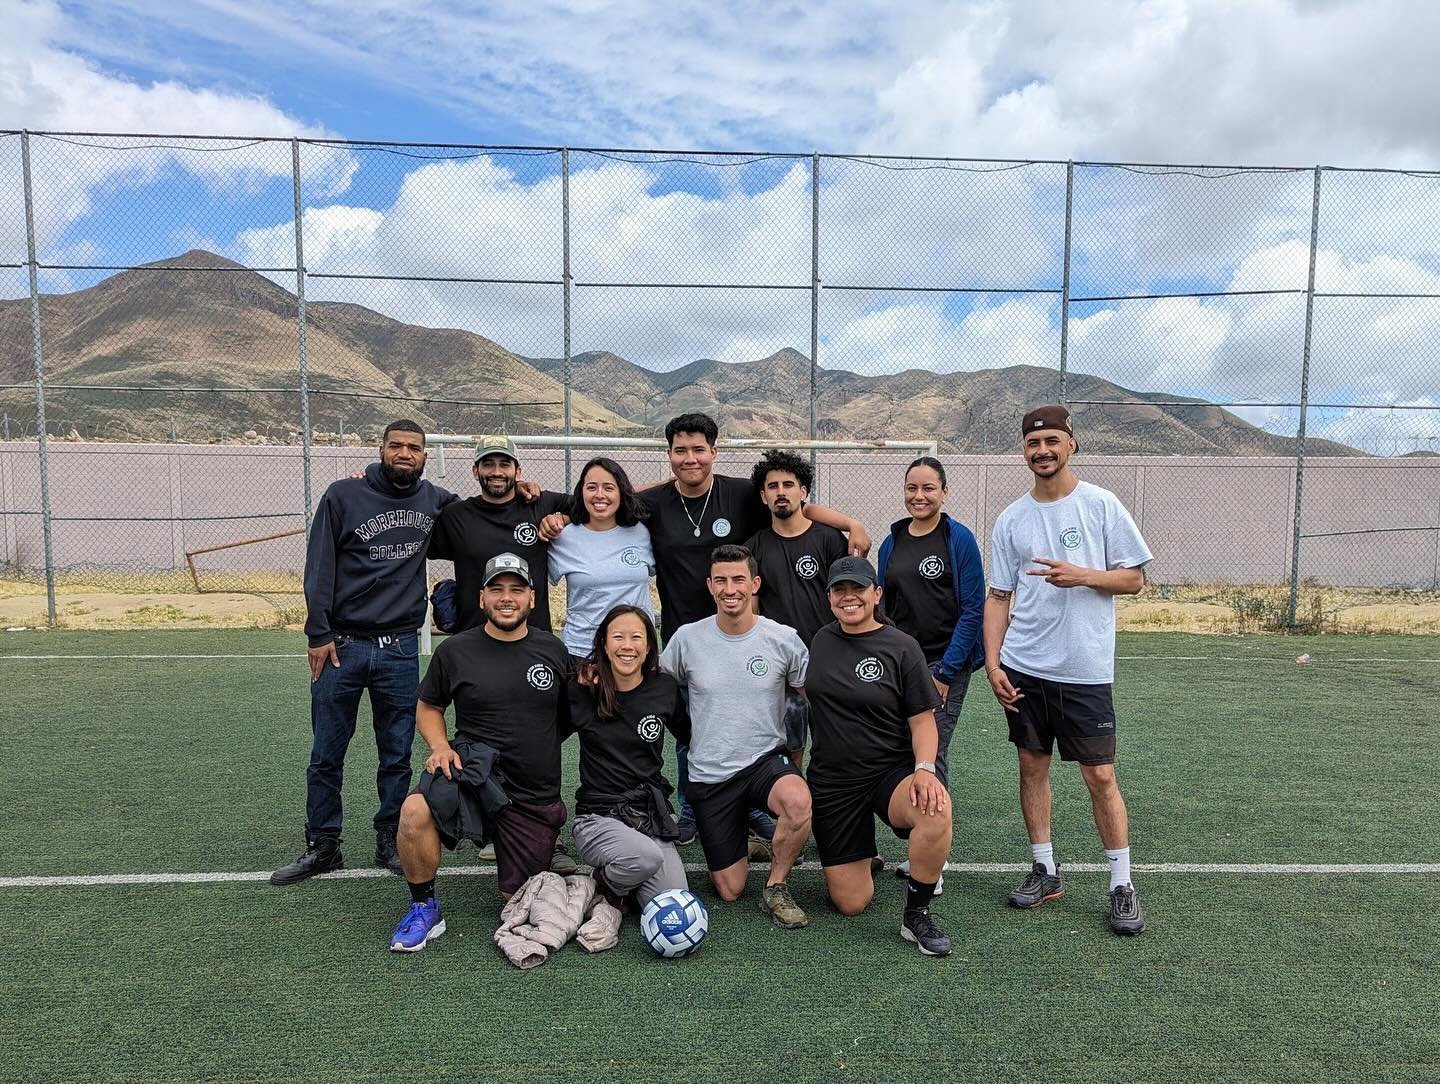 Mexico Day 2 Recap: On Sunday, the team attended early morning mass and had a traditional Mexican breakfast of chilaquiles, beans, and eggs. ⛪️🍳🇲🇽

They prepped some equipment and headed to the community of La Antorcha to host a soccer clinic. Due